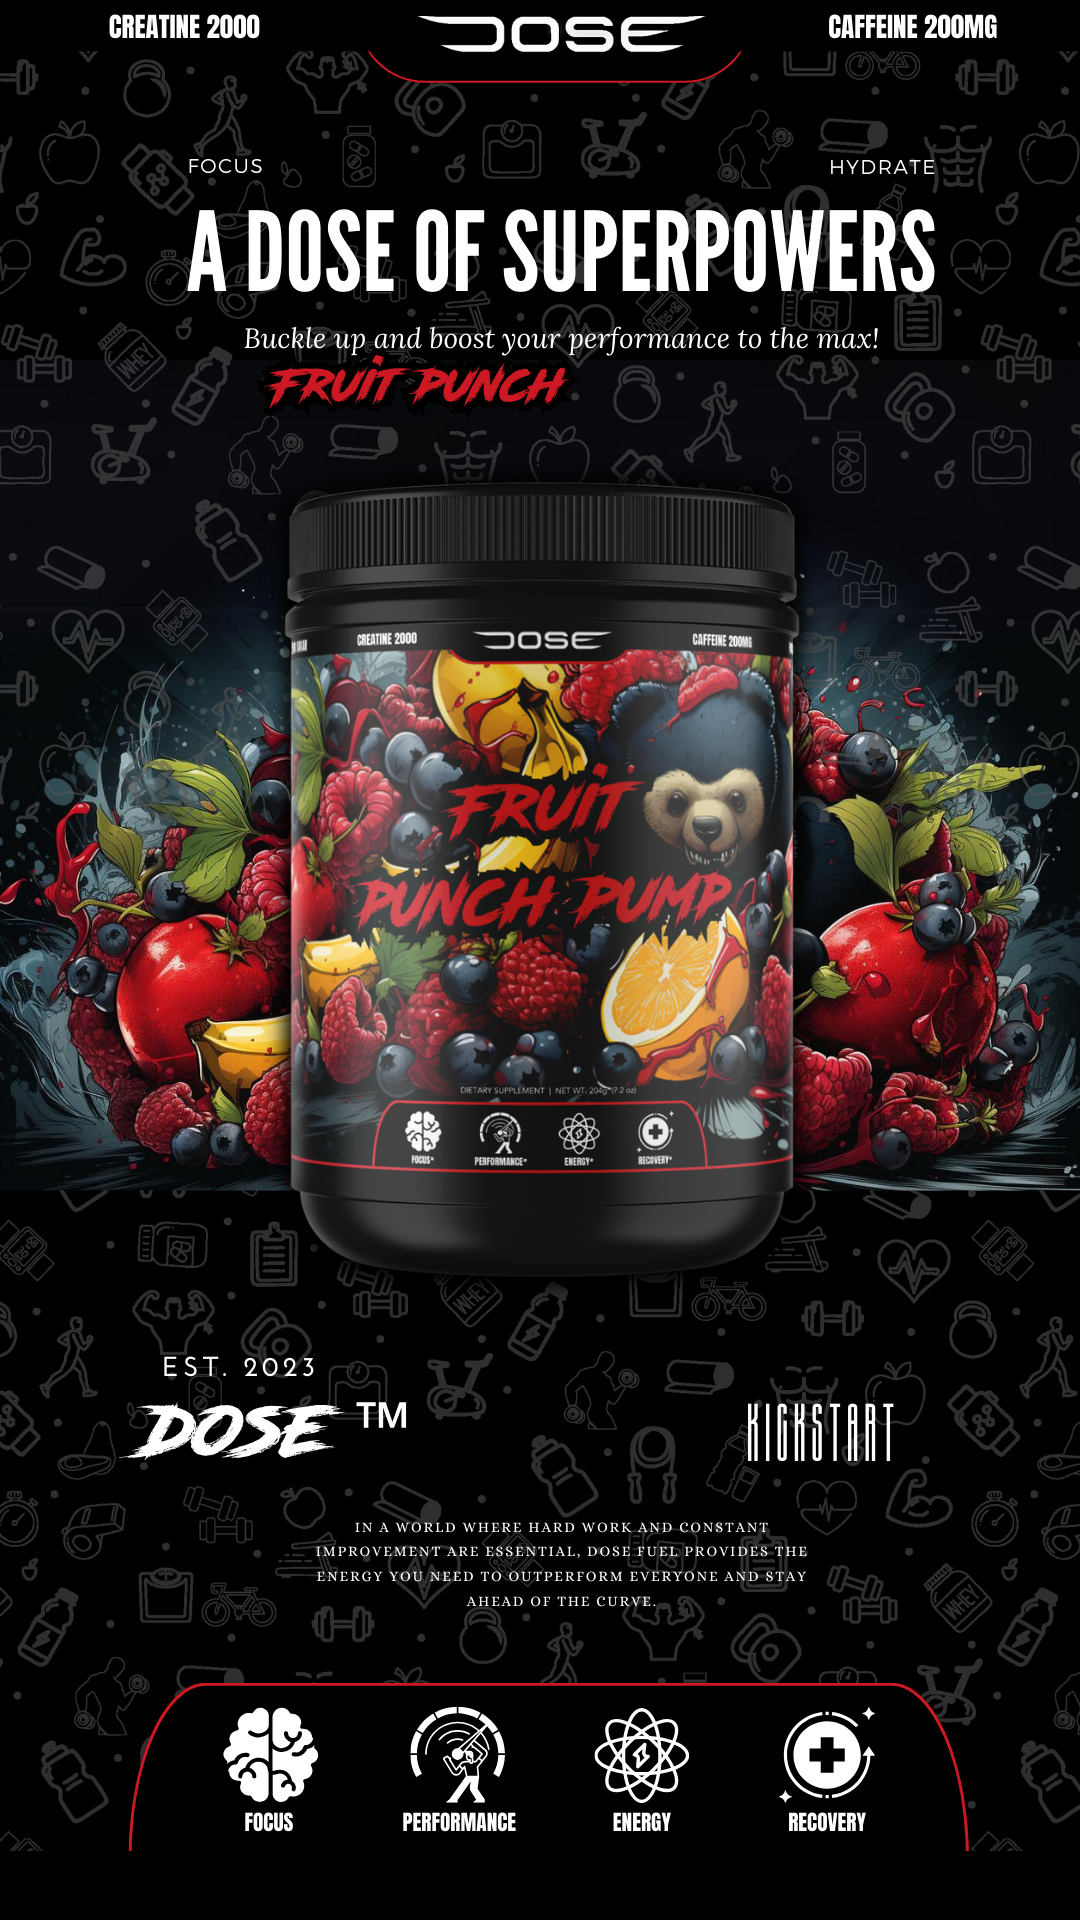 Dose Fuel Fruit Punch Pump - A Dose of Superpowers. Featuring vibrant imagery of fresh fruits like berries, oranges, and pomegranates, this supplement boosts focus, performance, energy, and recovery. Contains 2000mg Creatine and 200mg Caffeine per serving. Established 2023, Dose Fuel provides the essential energy to outperform everyone and stay ahead of the curve. Focus, Performance, Energy, Recovery